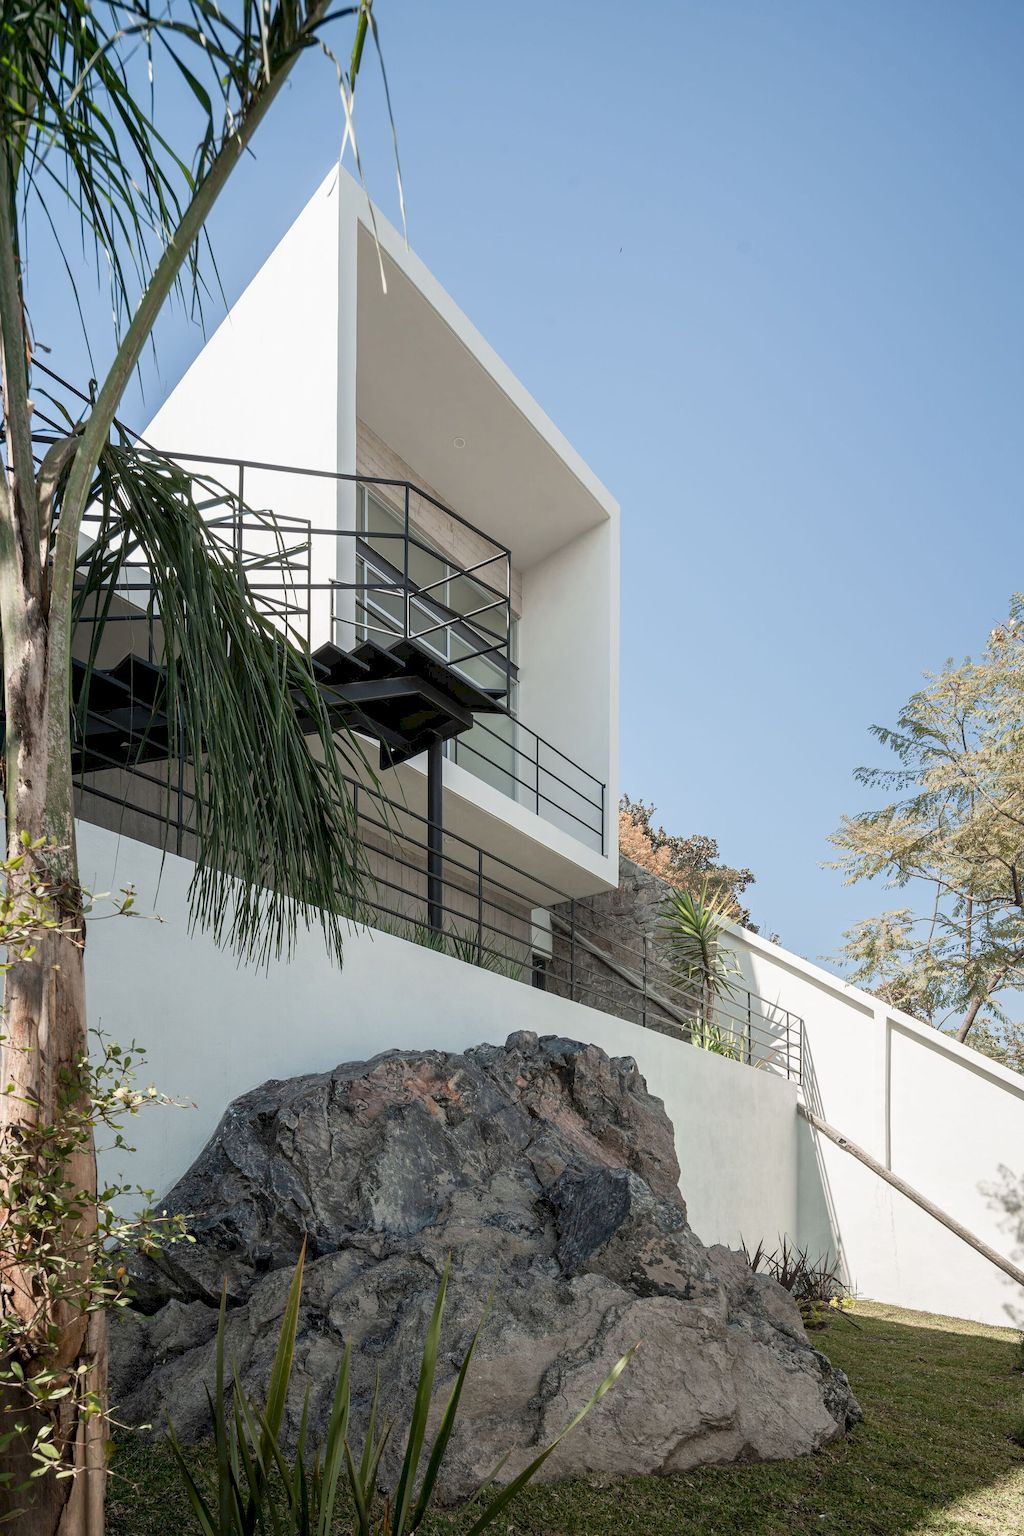 Stunning 2-storey House - Ep 02 House in Mexico by Colectivo NDS